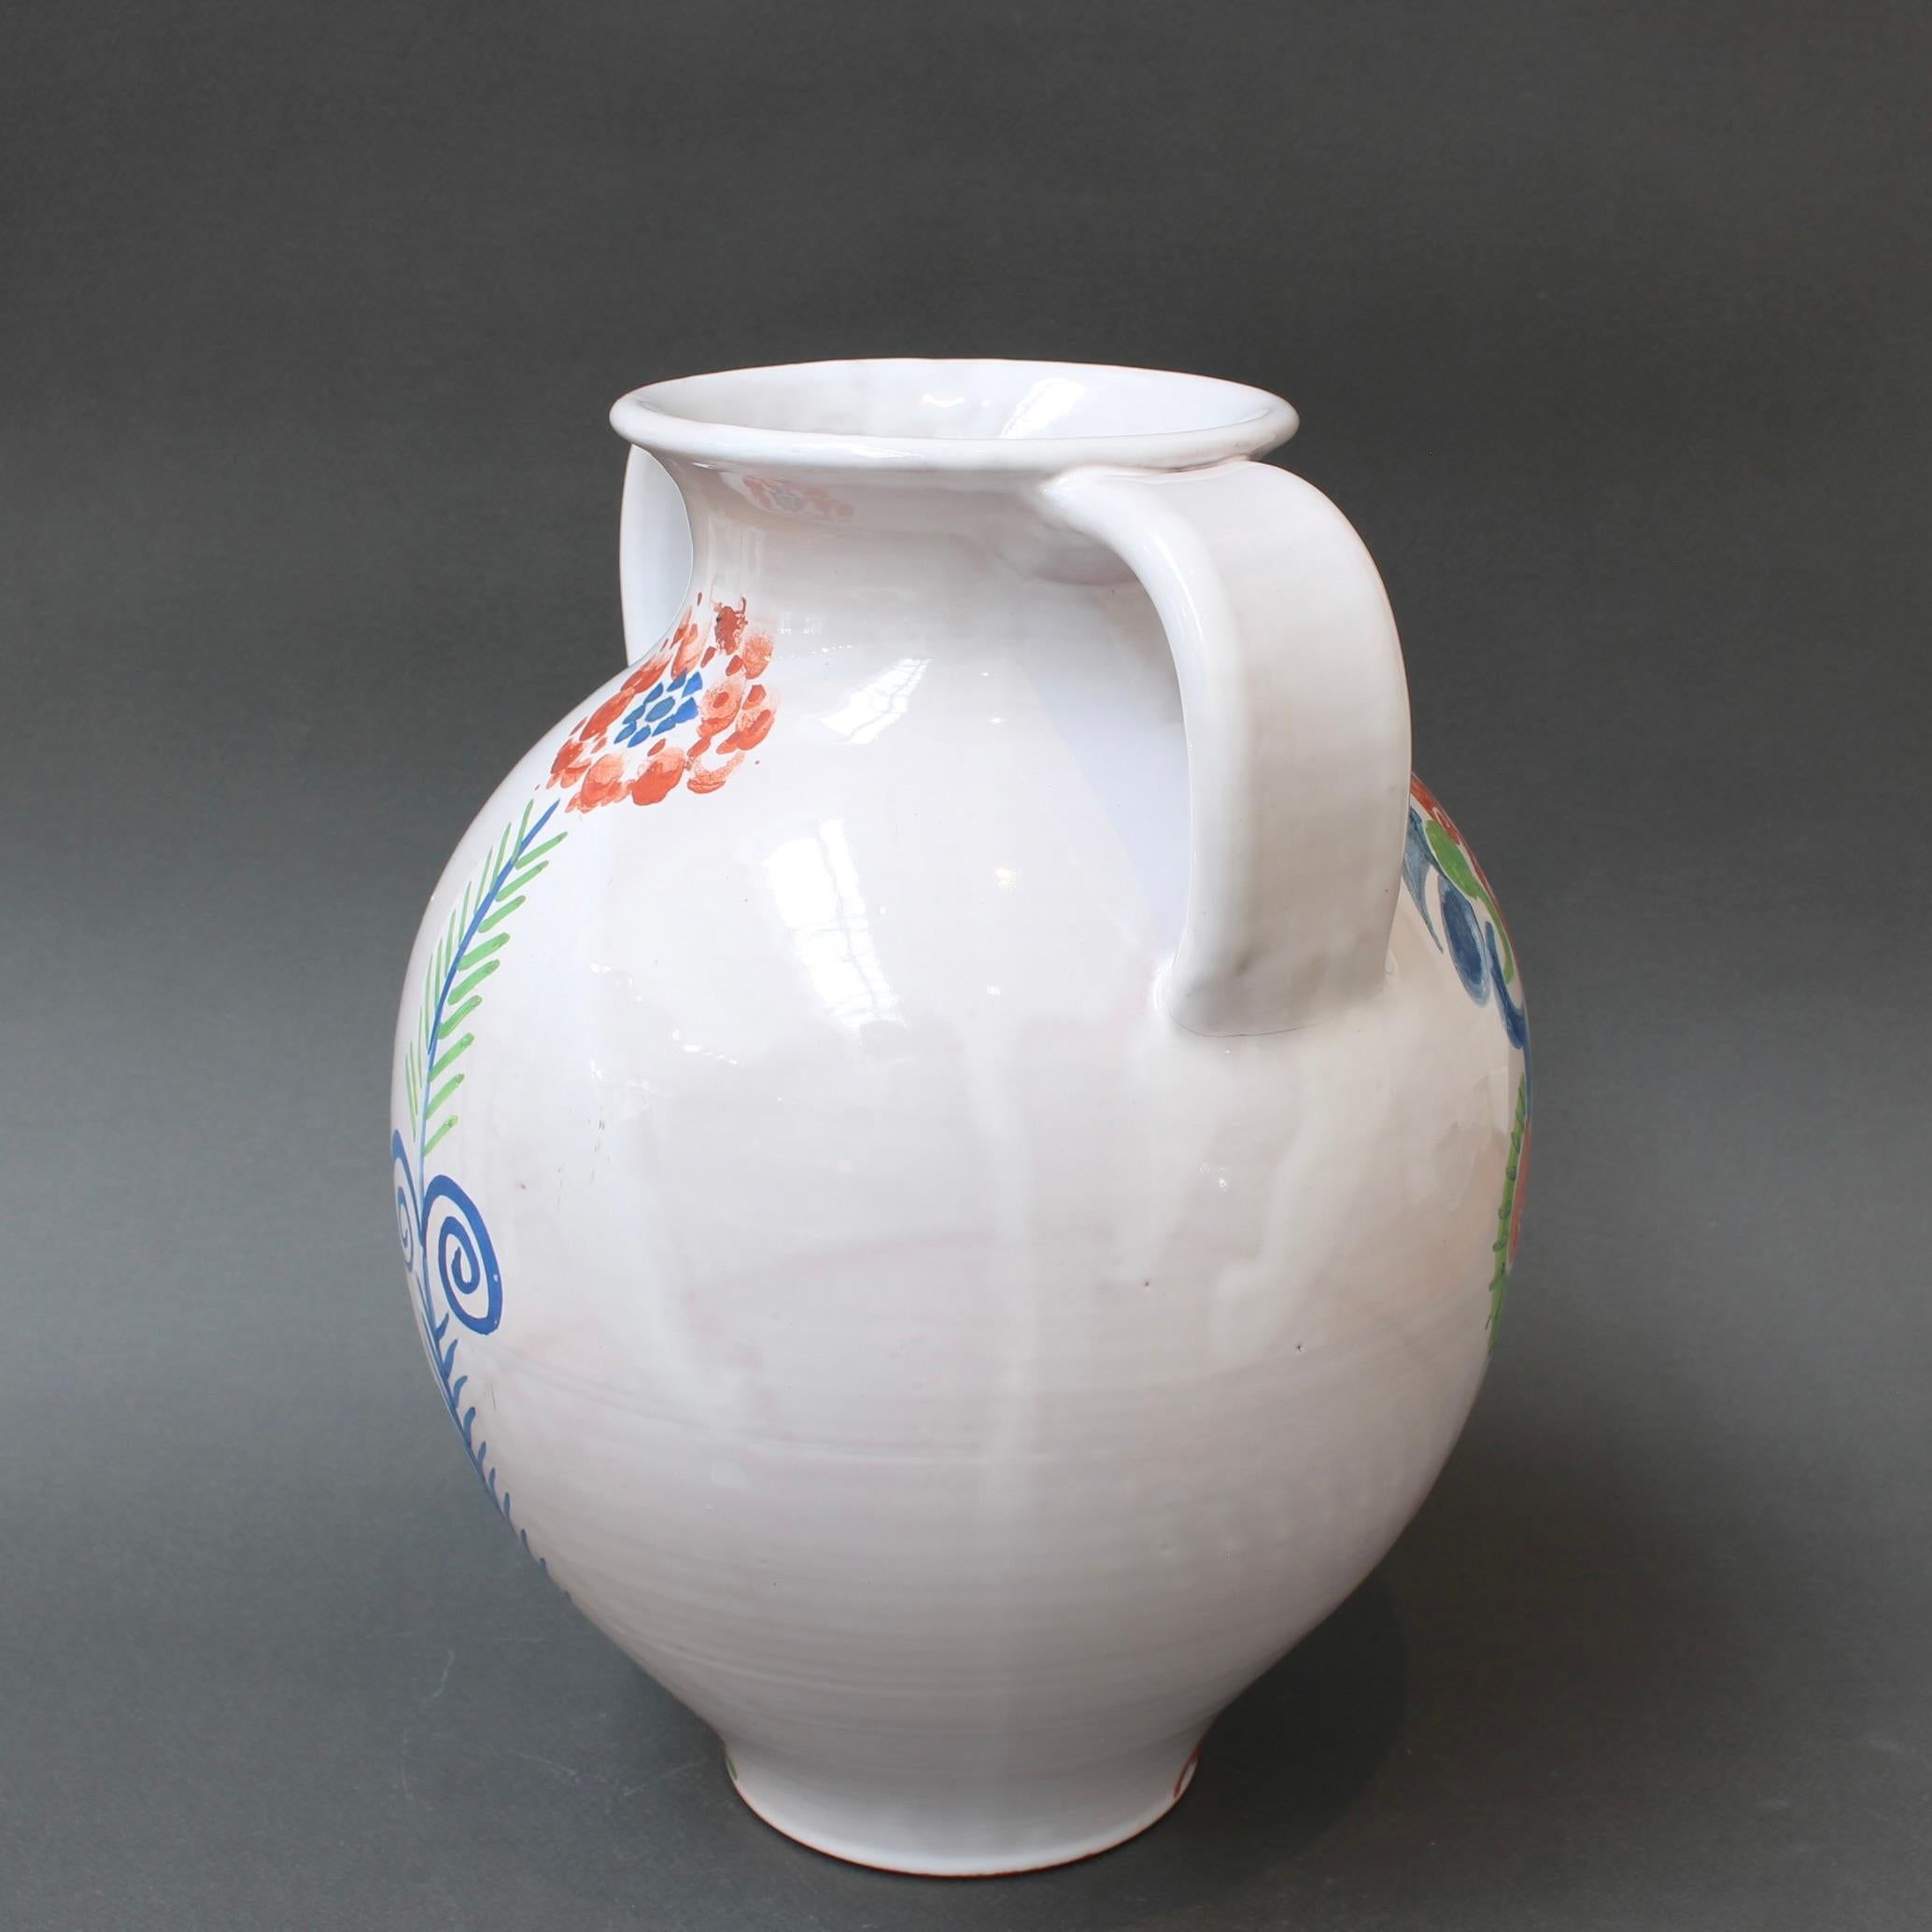 Vintage French Hand-Painted Ceramic Vase by Roger Capron (circa 1960s) For Sale 2